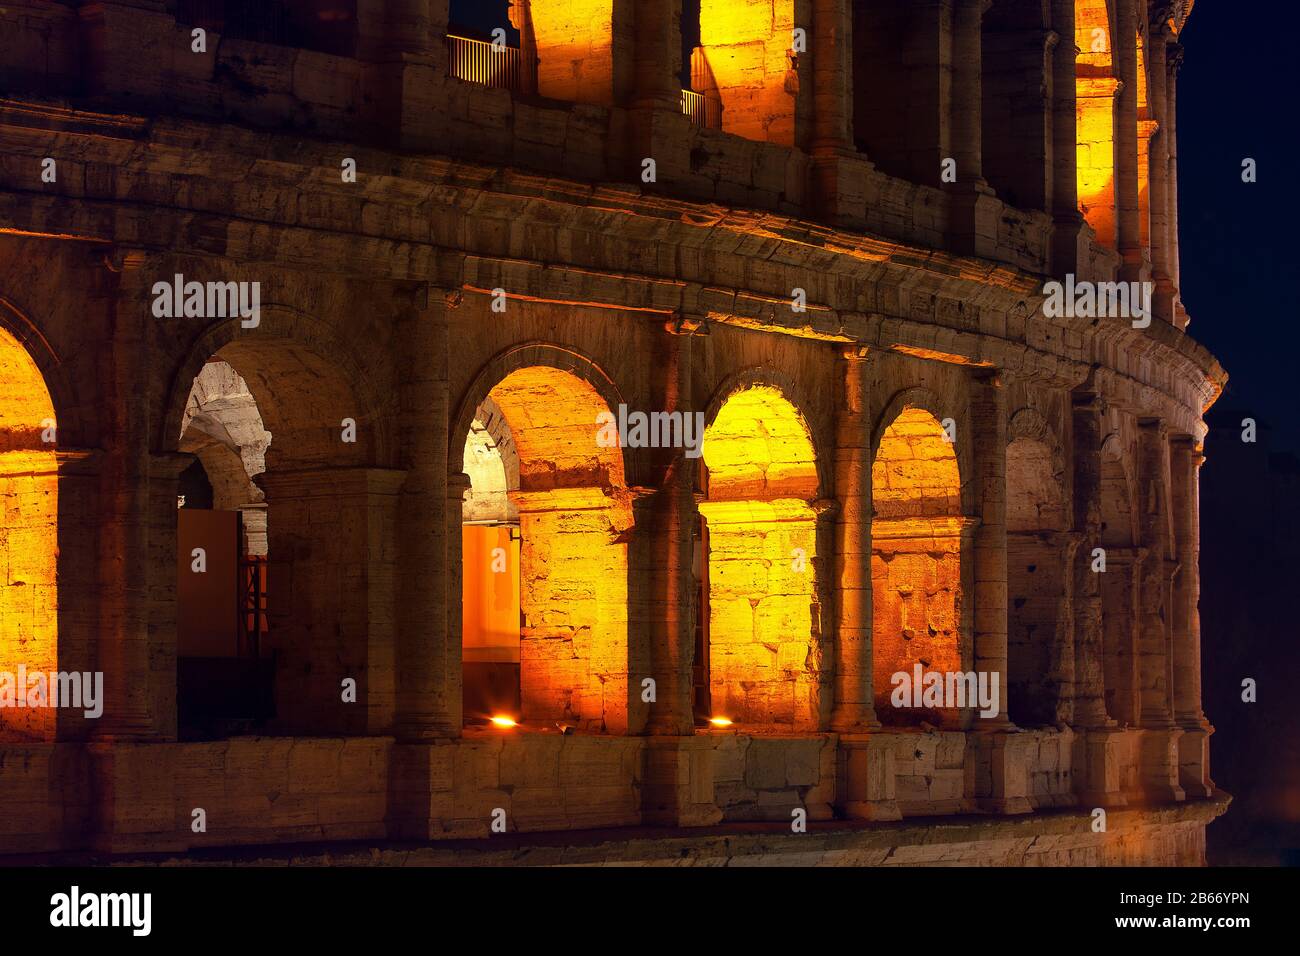 illuminated Colosseum arches in the nighttime Stock Photo